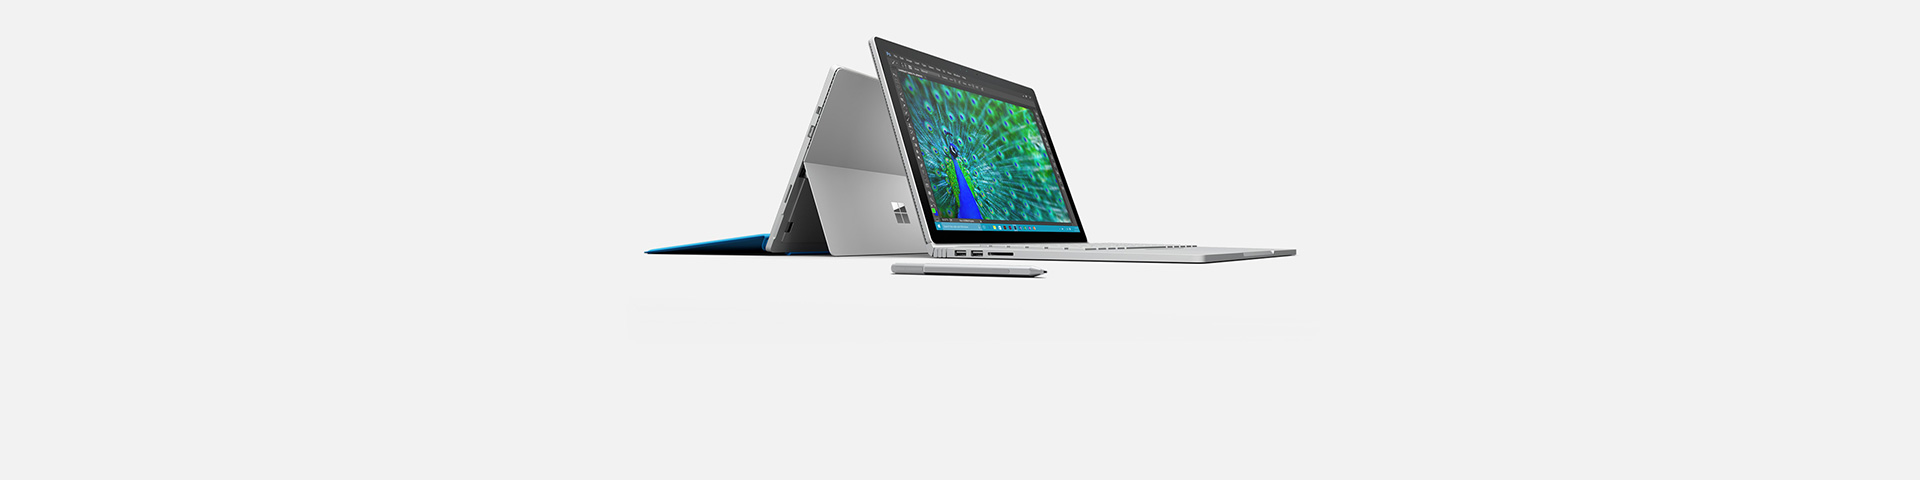 Surface devices, learn more